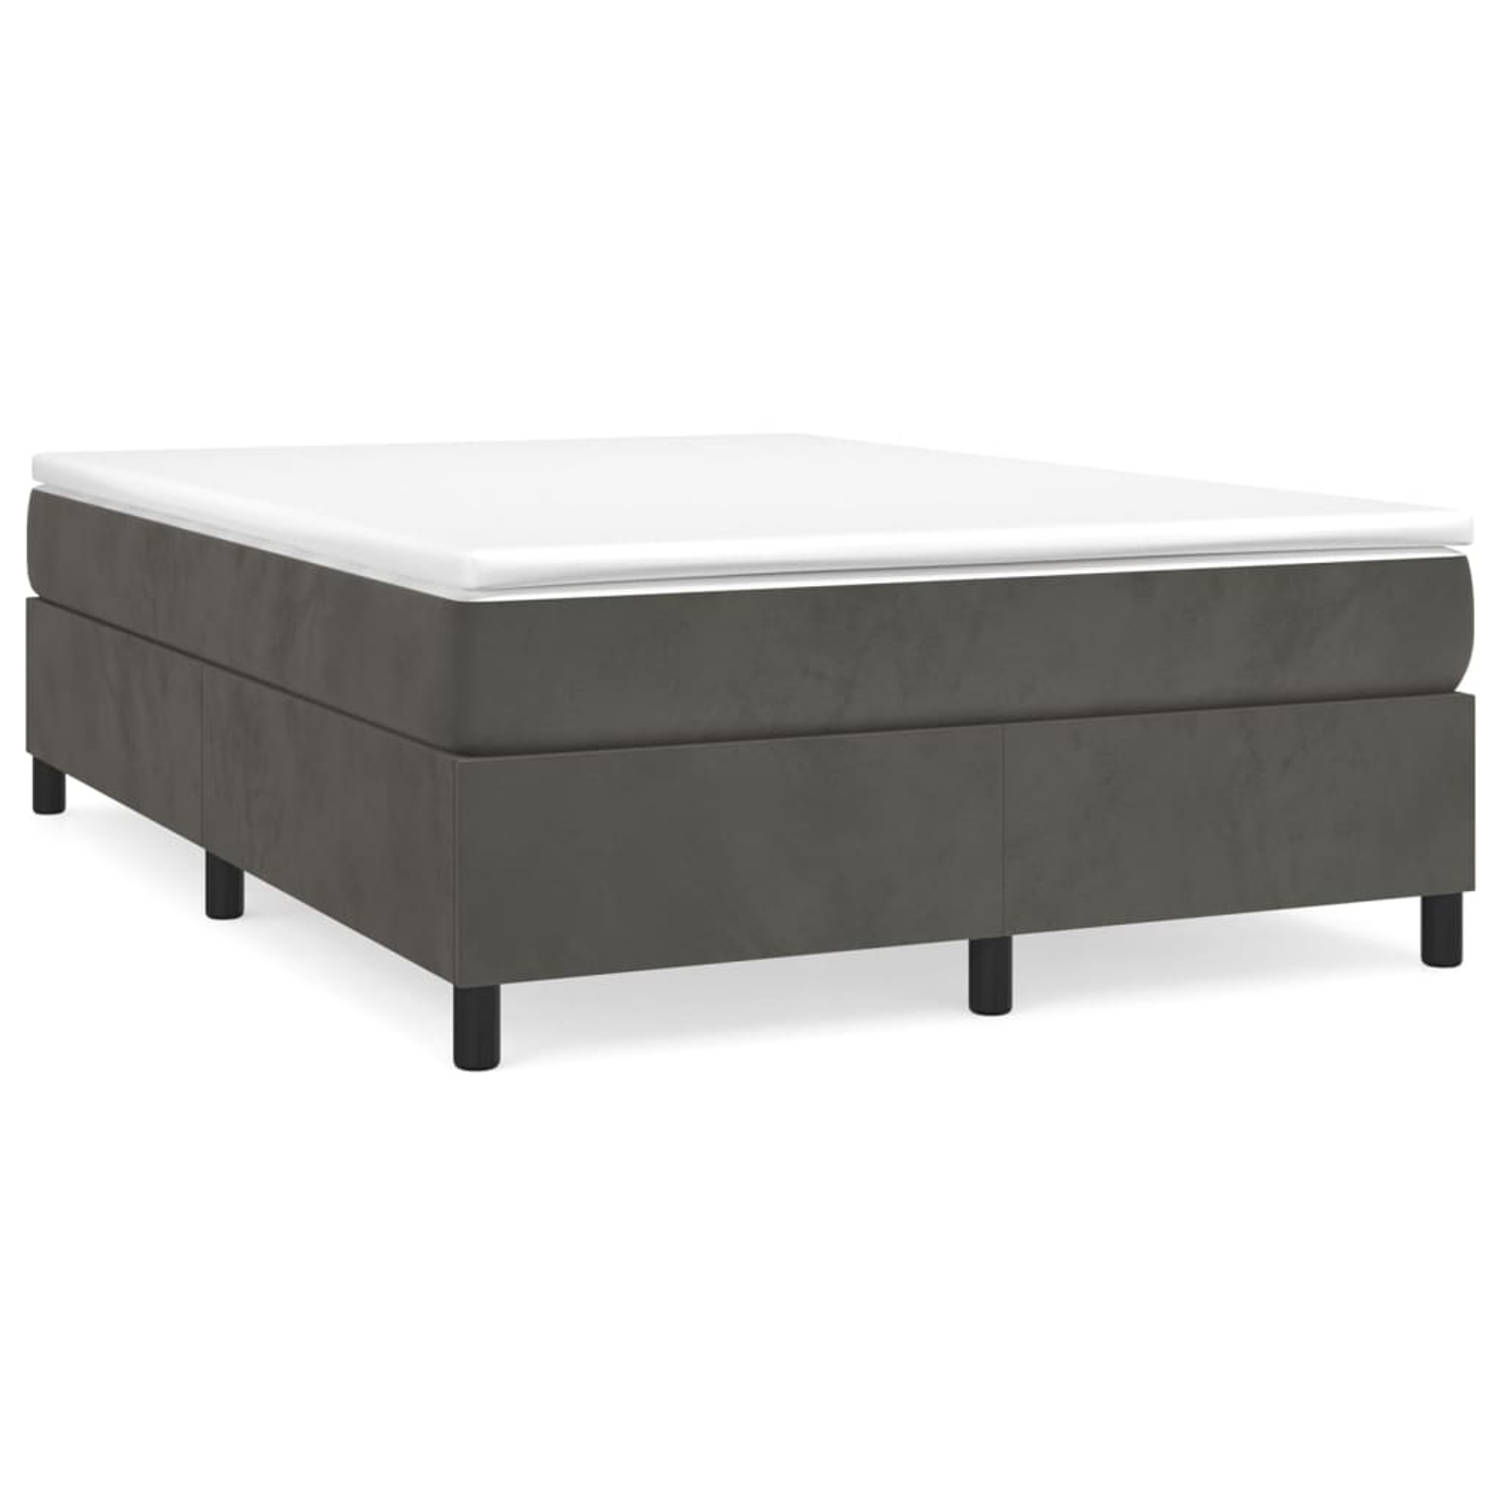 The Living Store Boxspringframe fluweel donkergrijs 140x190 cm - Bed